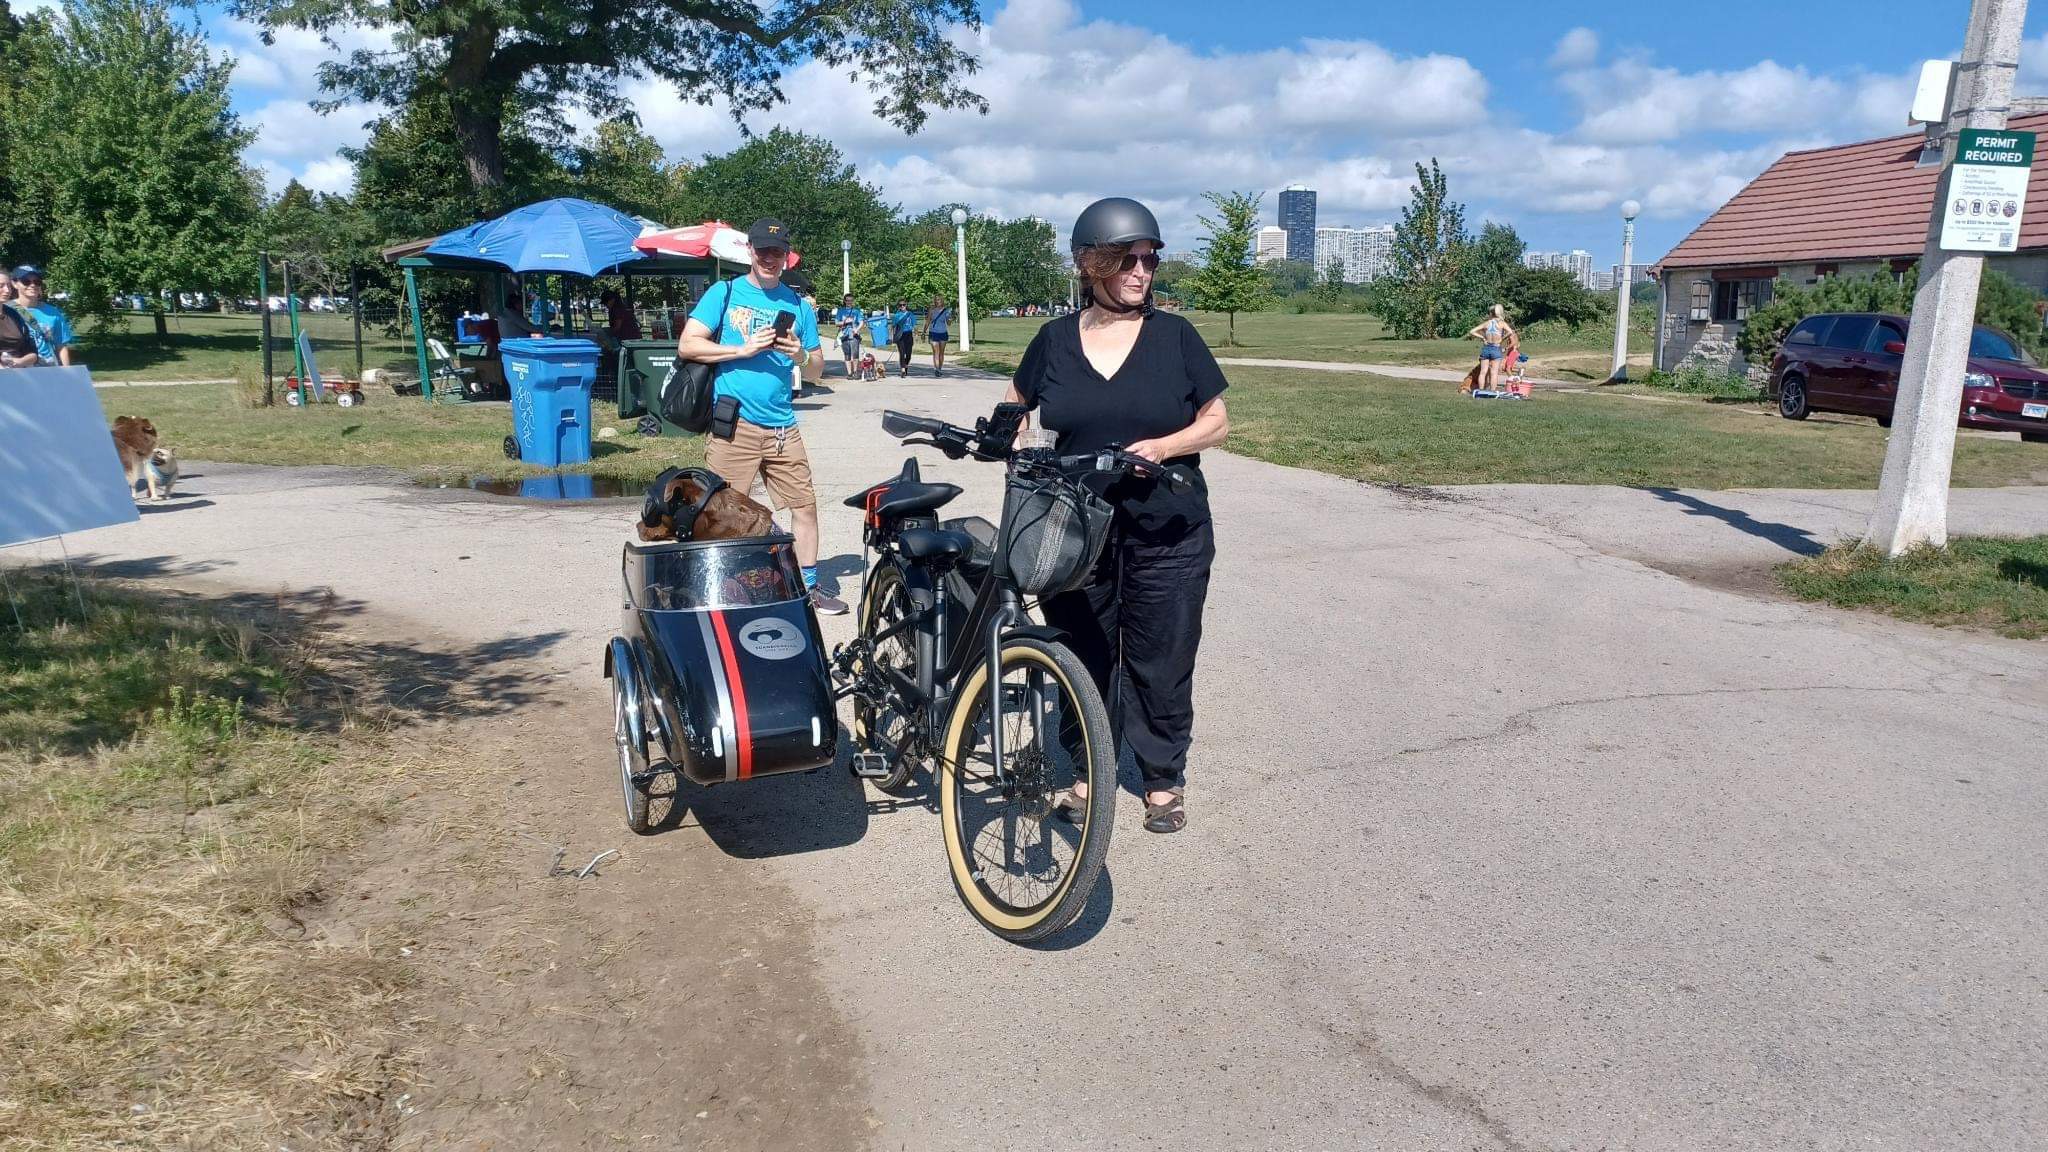 An array of cool characters made the 5K, including this lucky dog in his Mum's sidecar!